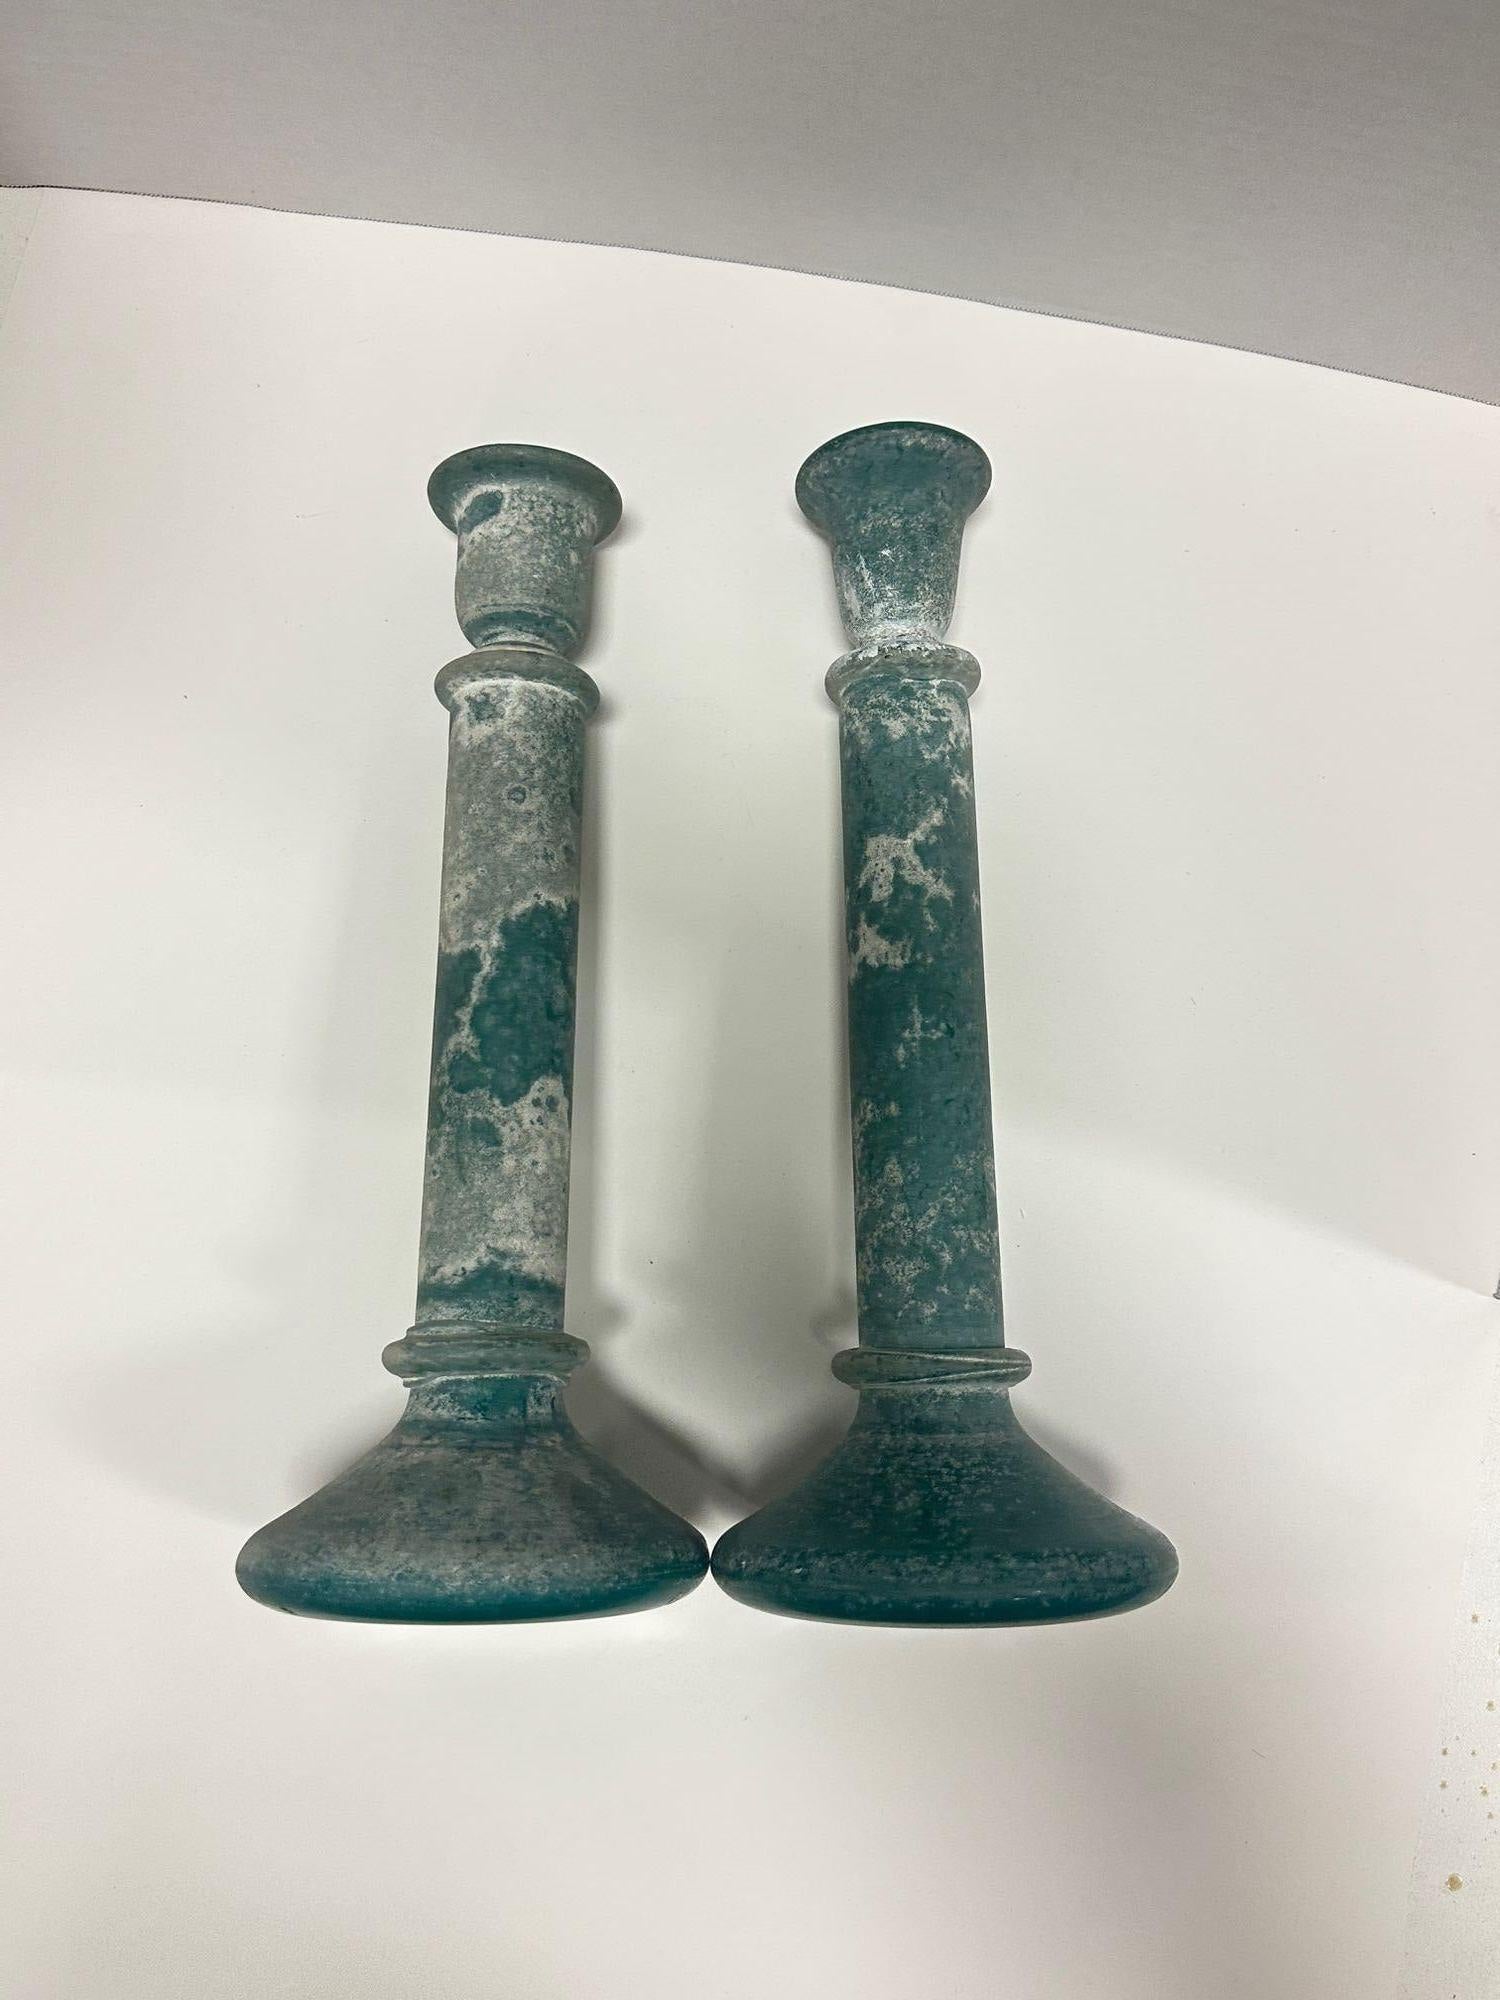 Vintage Candlestick holders Turquoise Glass Frosted, Pair 1